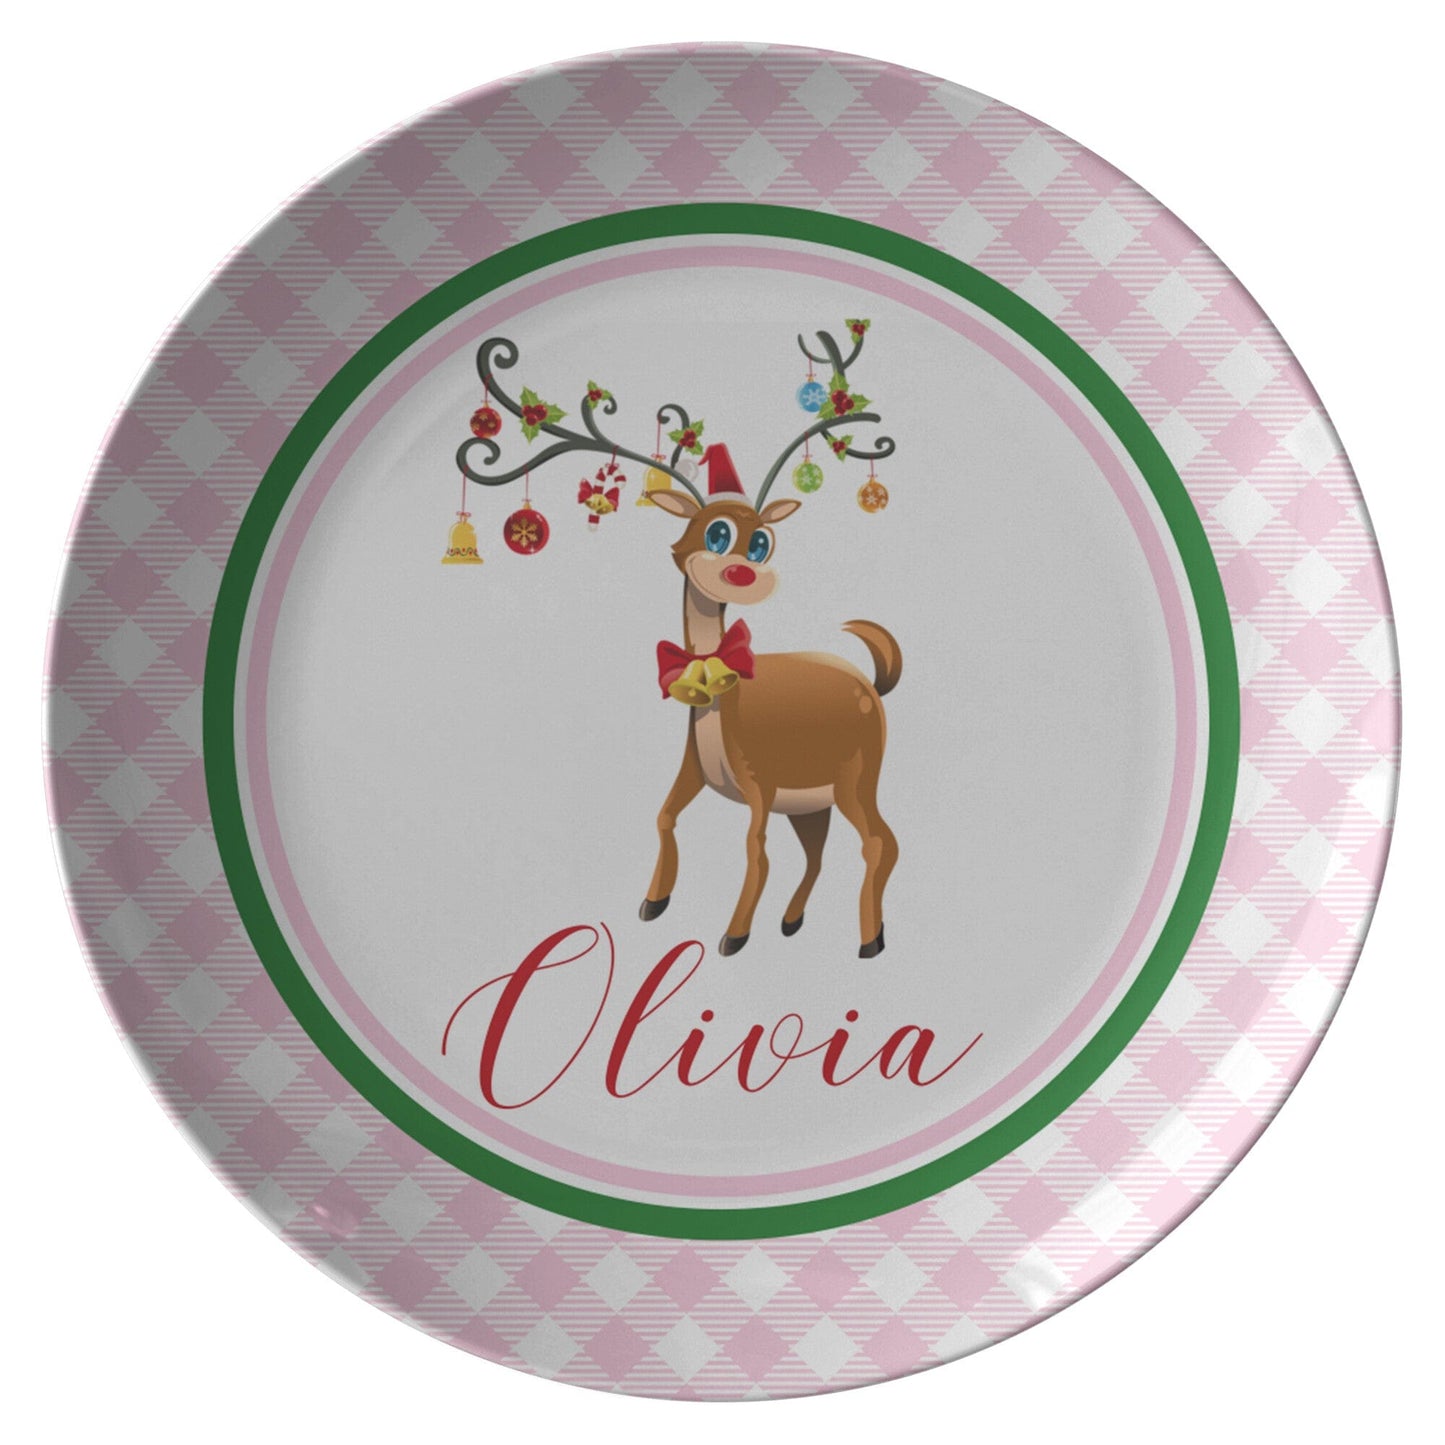 Kate McEnroe New York Personalized Rudolph Red Nose Reindeer Pink Gingham Plate Personalized Plates